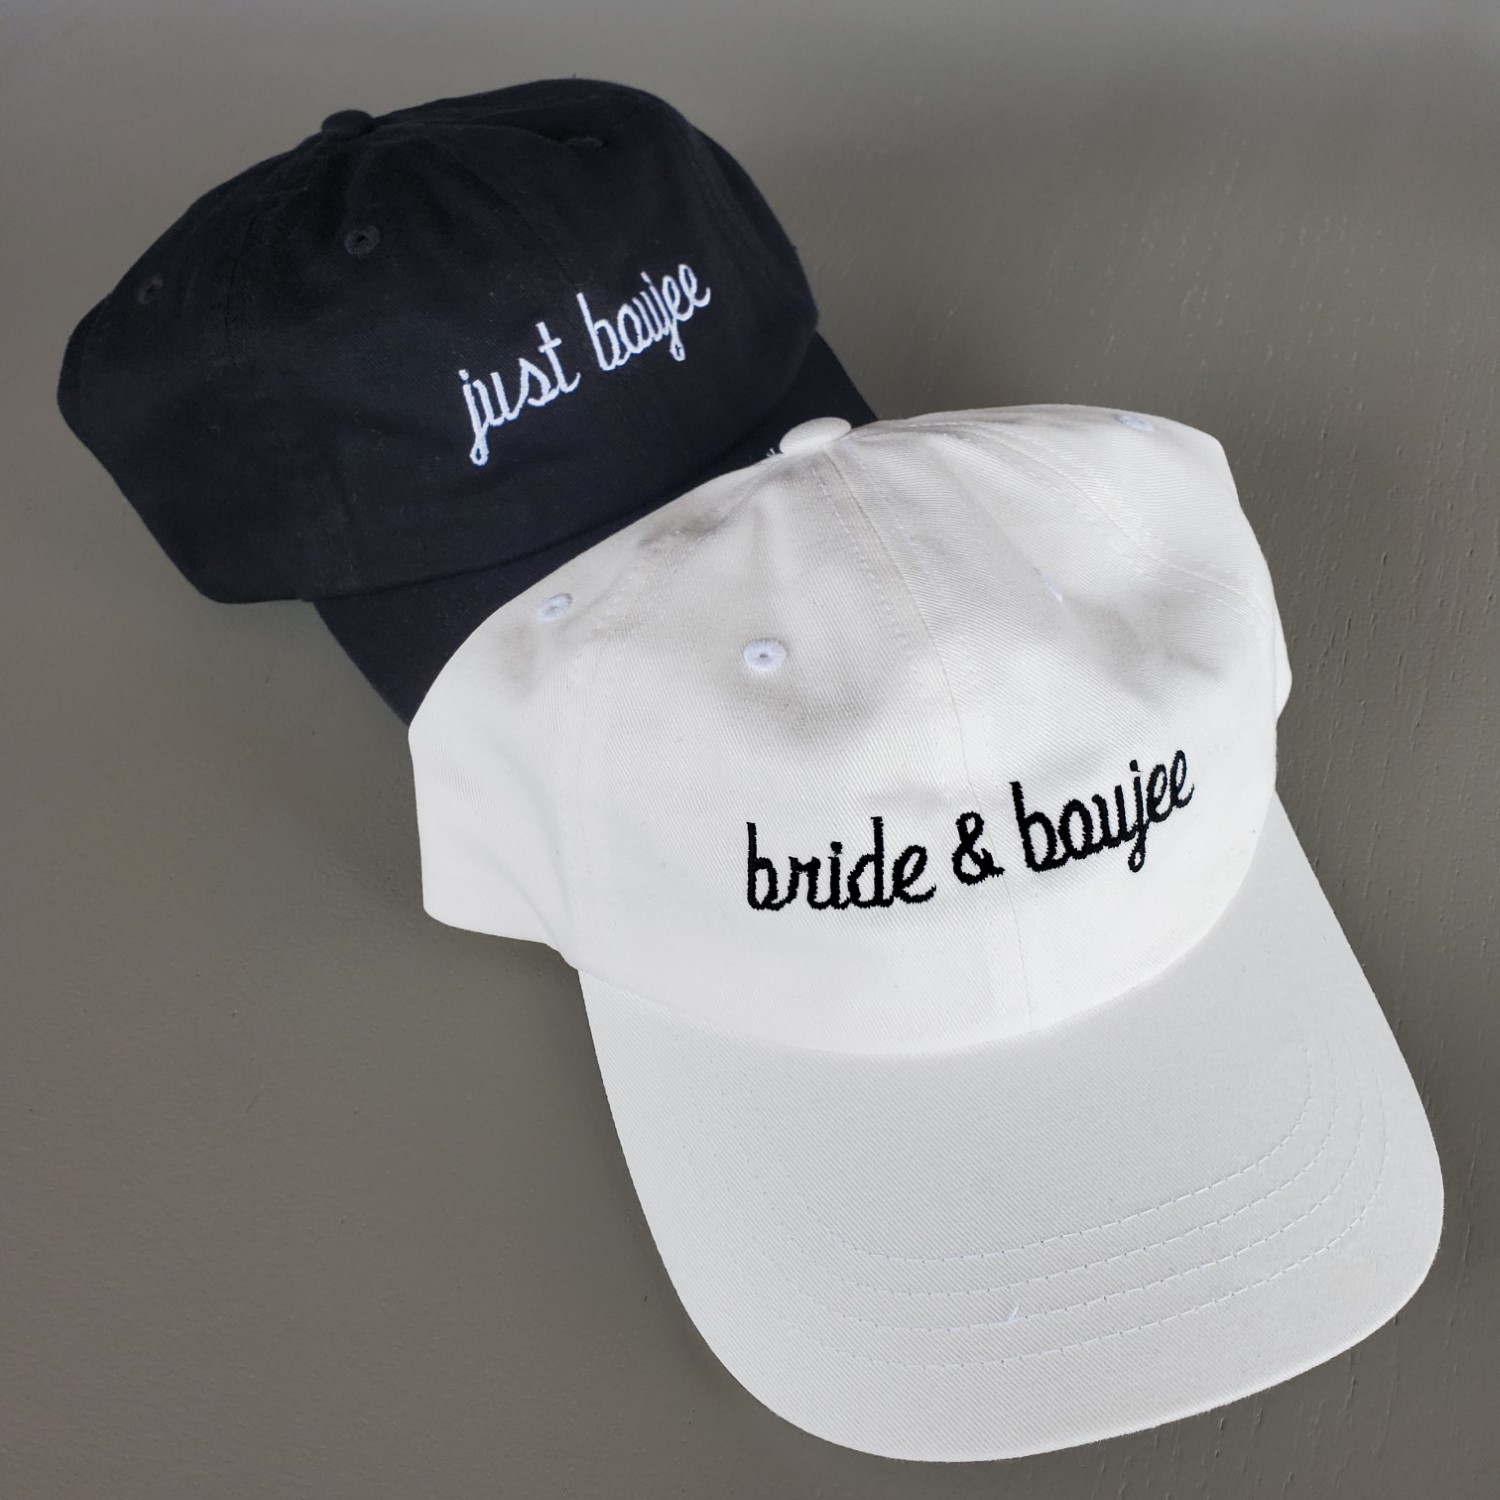 matching-black-and-white-embroidery-hat